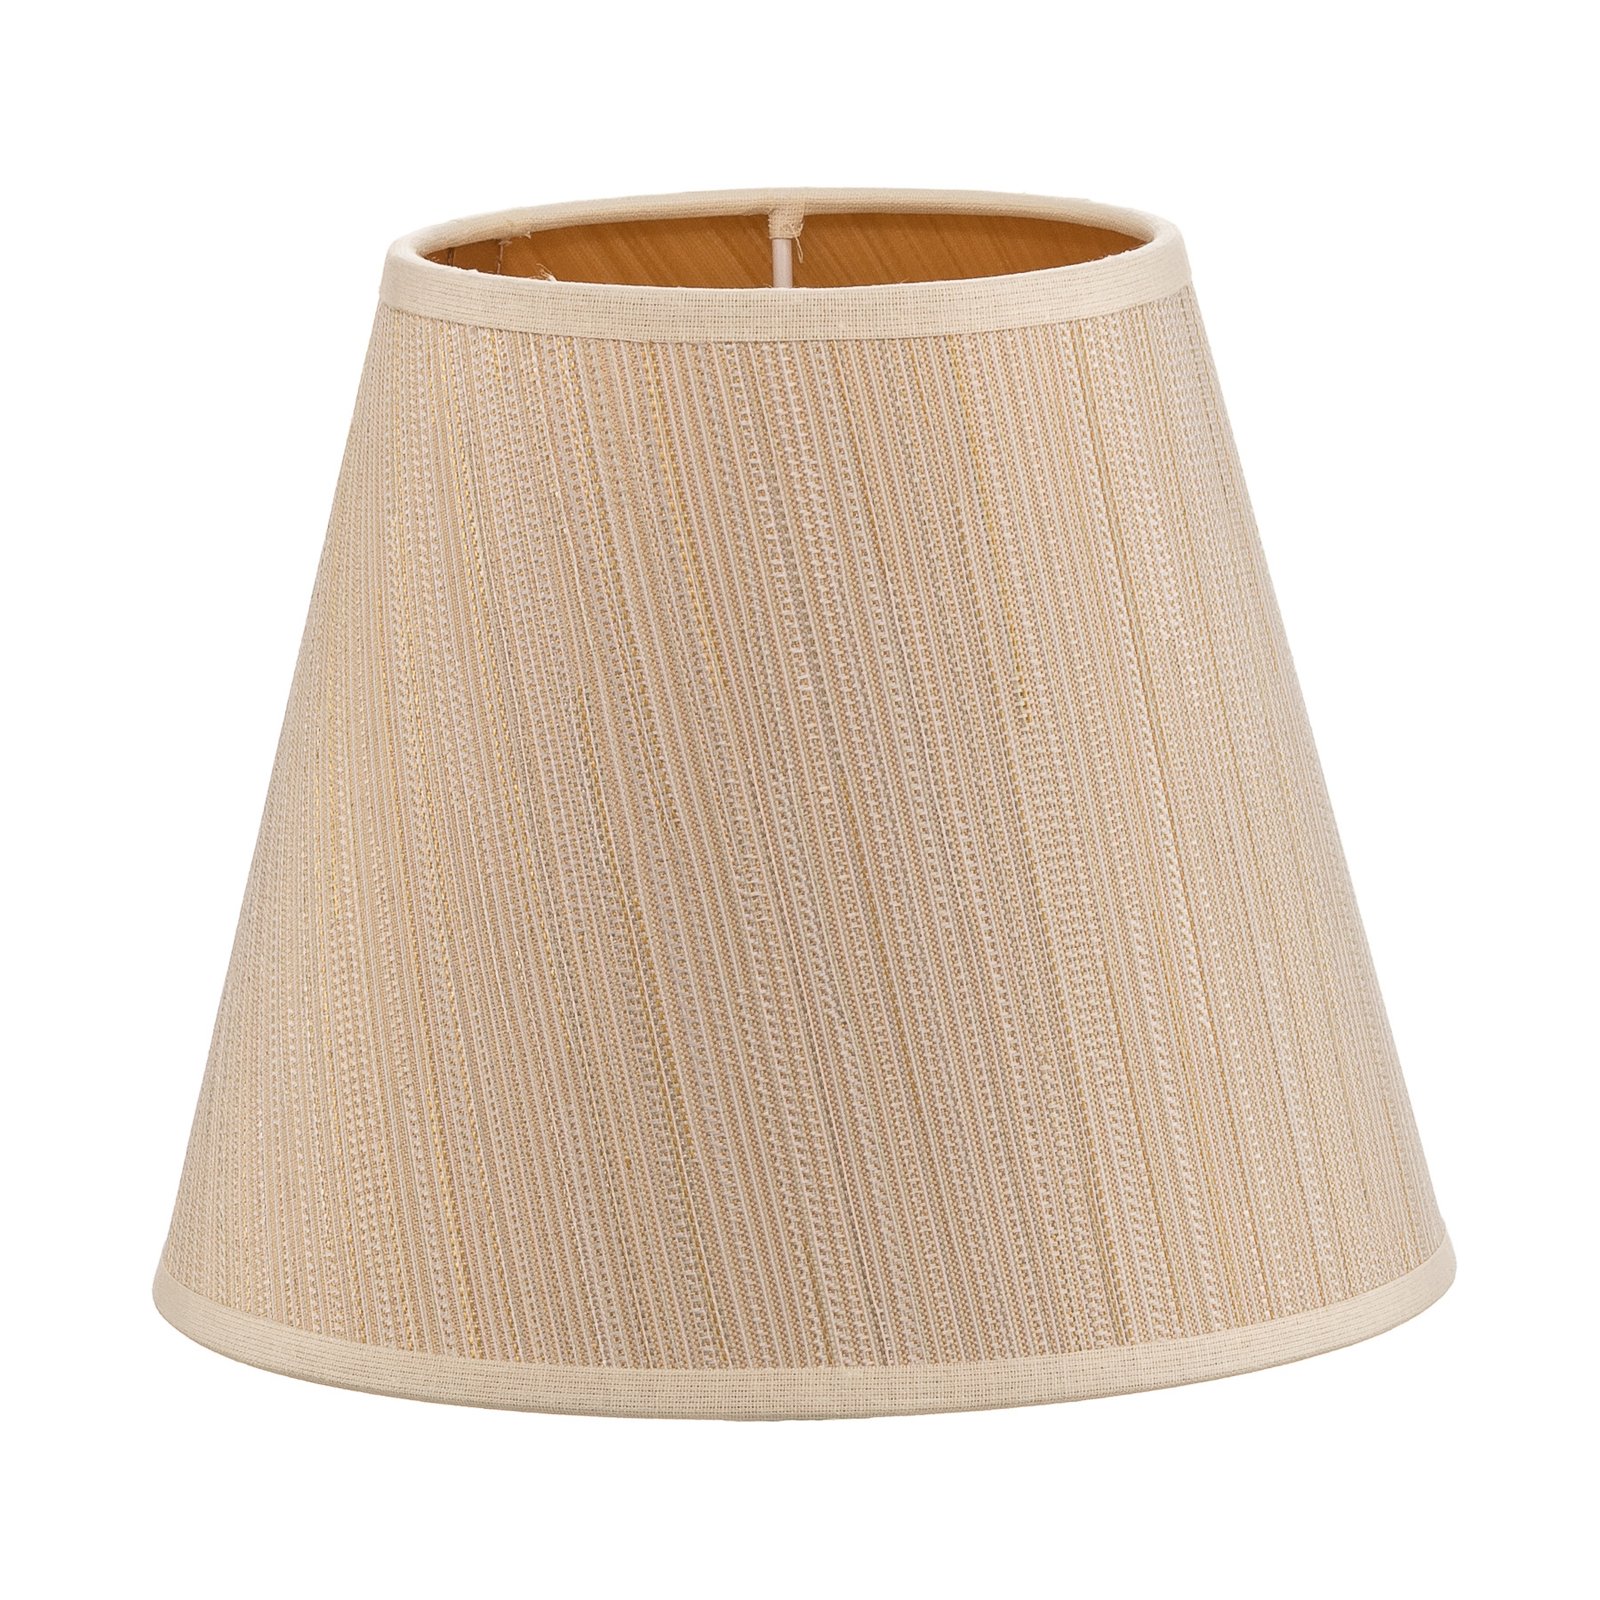 Sofia lampshade height 15.5 cm white/gold streaks